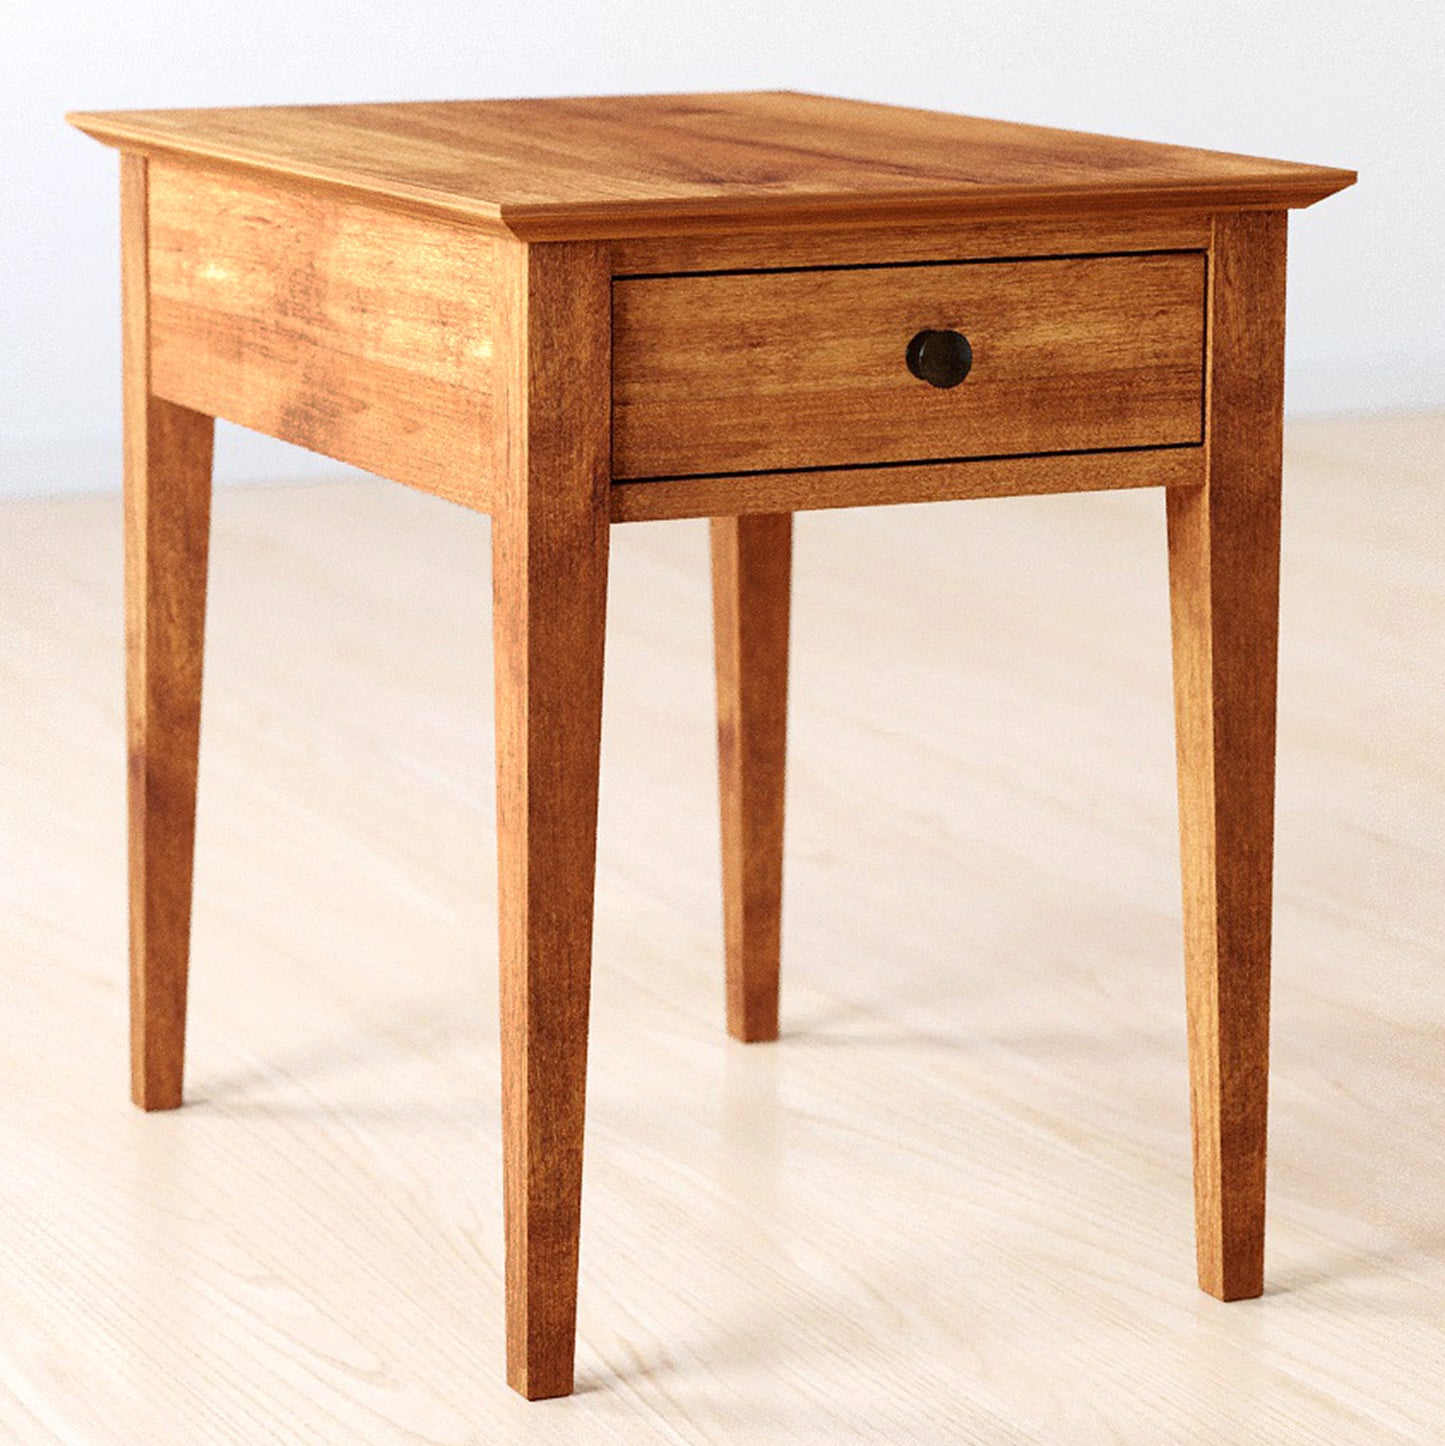 Gable Road One-Drawer End Table